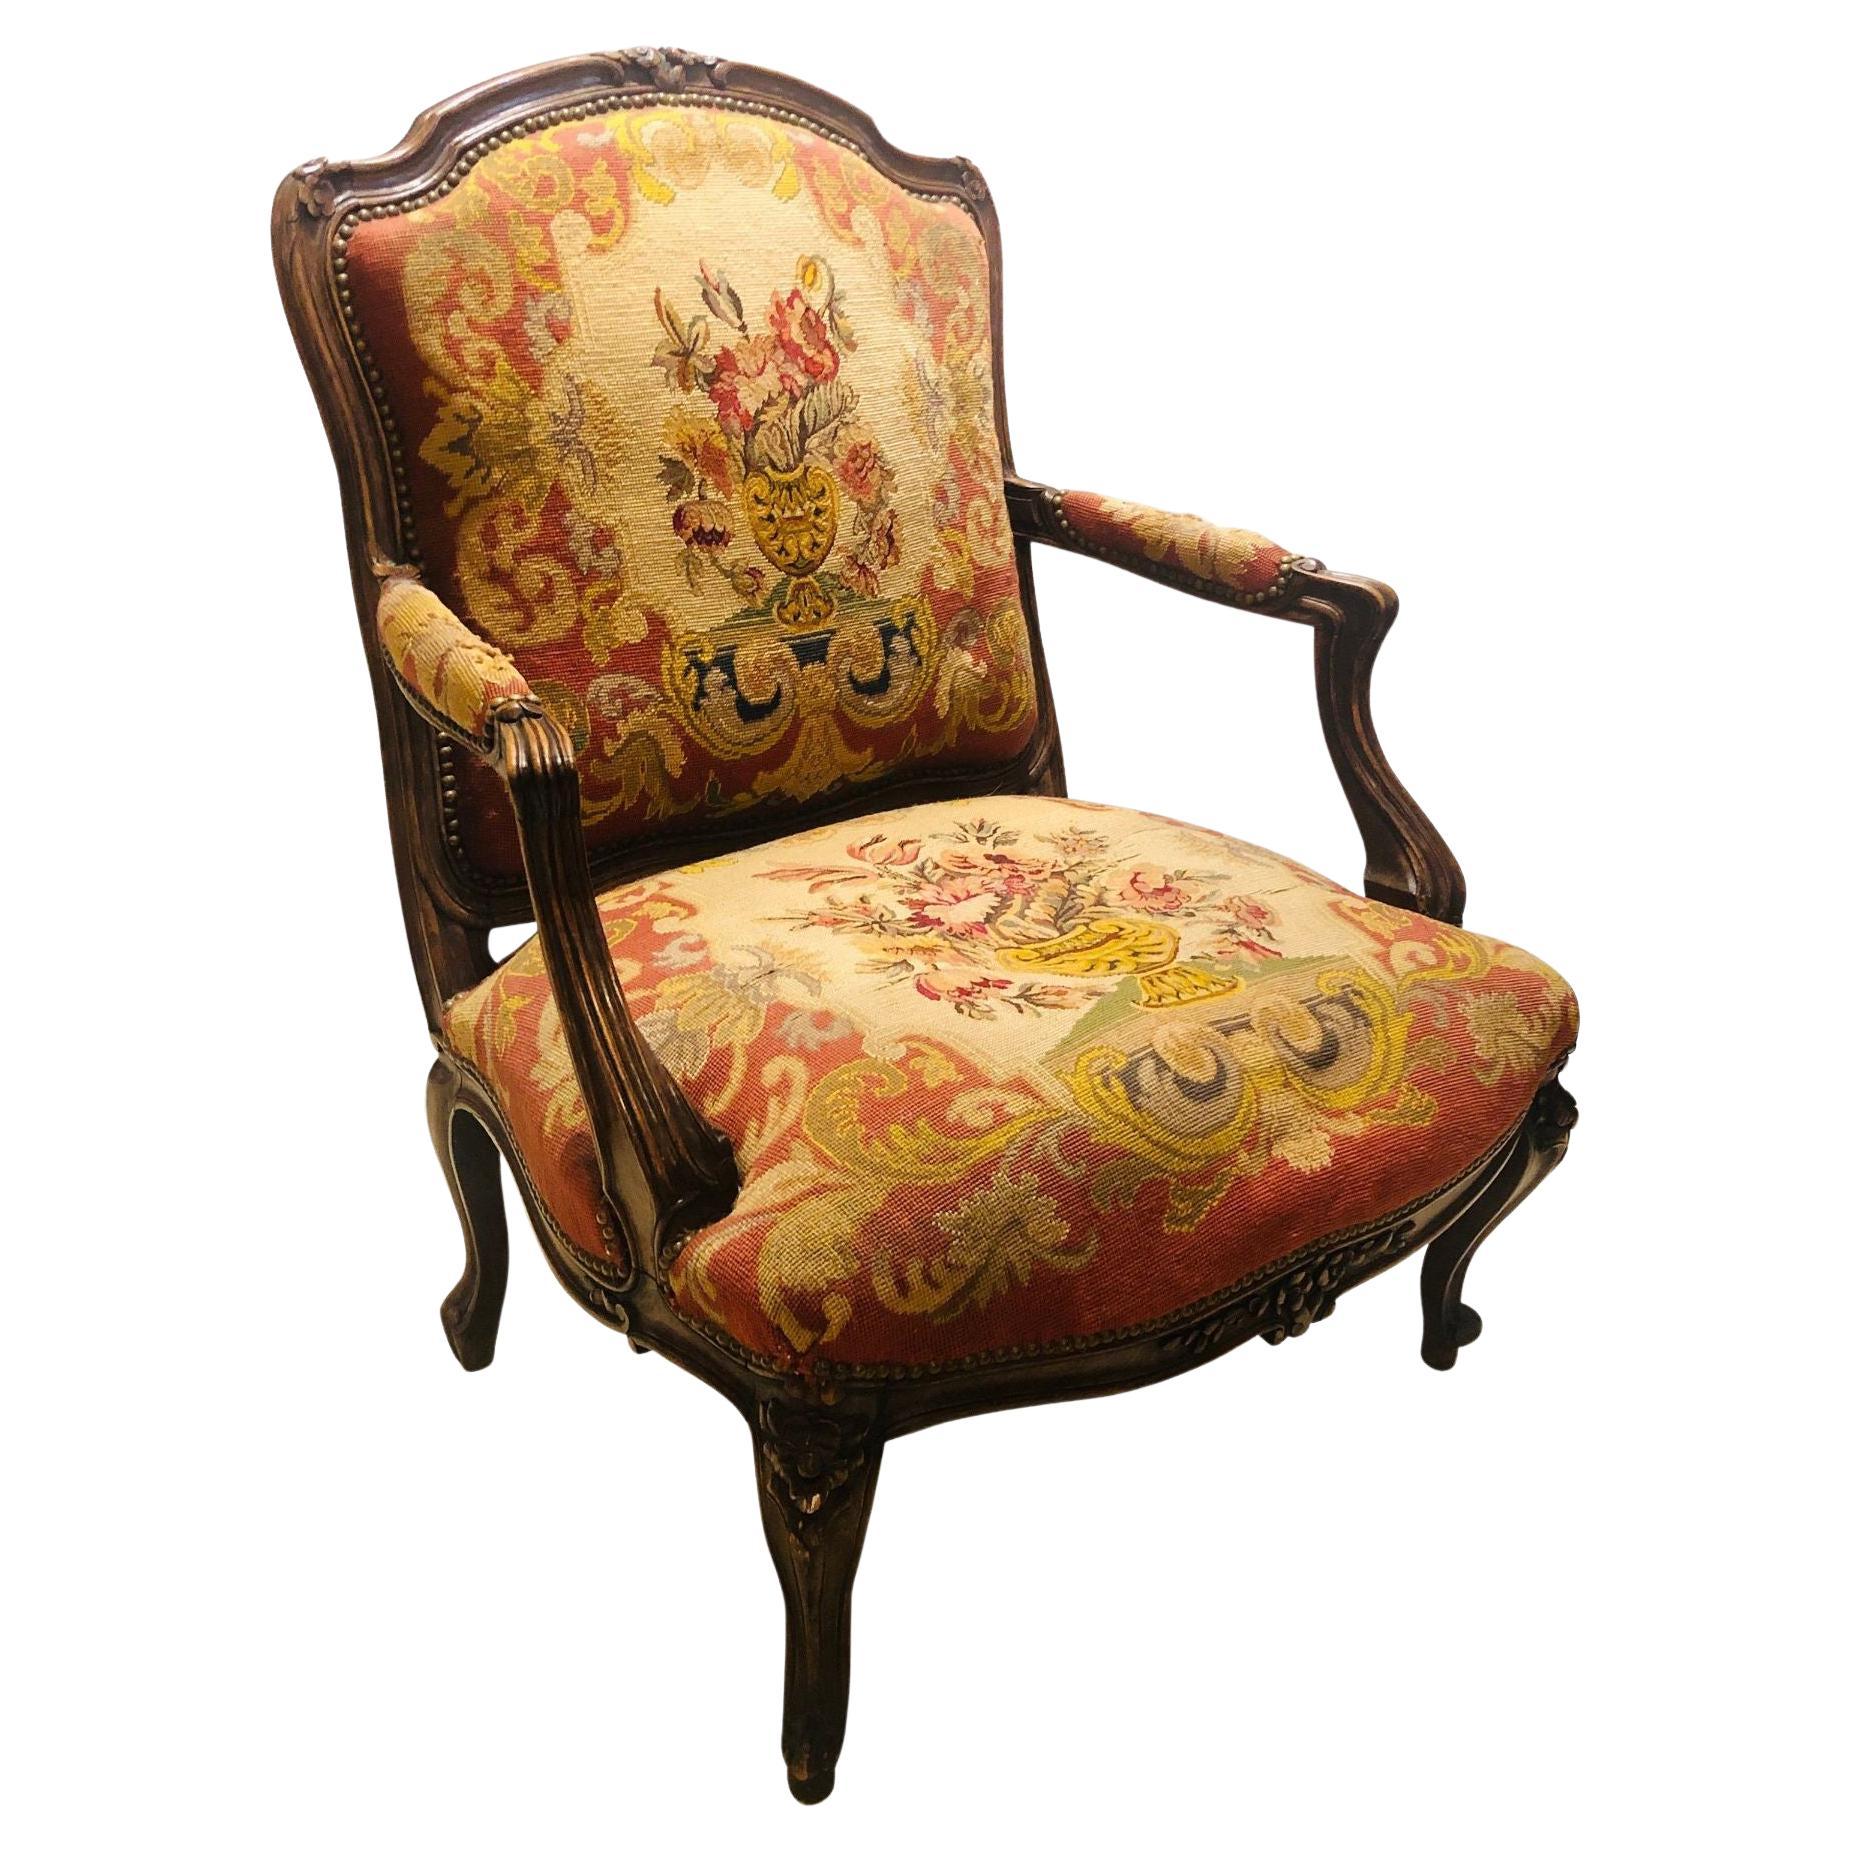 19th Century Louis XV Style Armchair Bergere Petite and Gros Point Upholstery